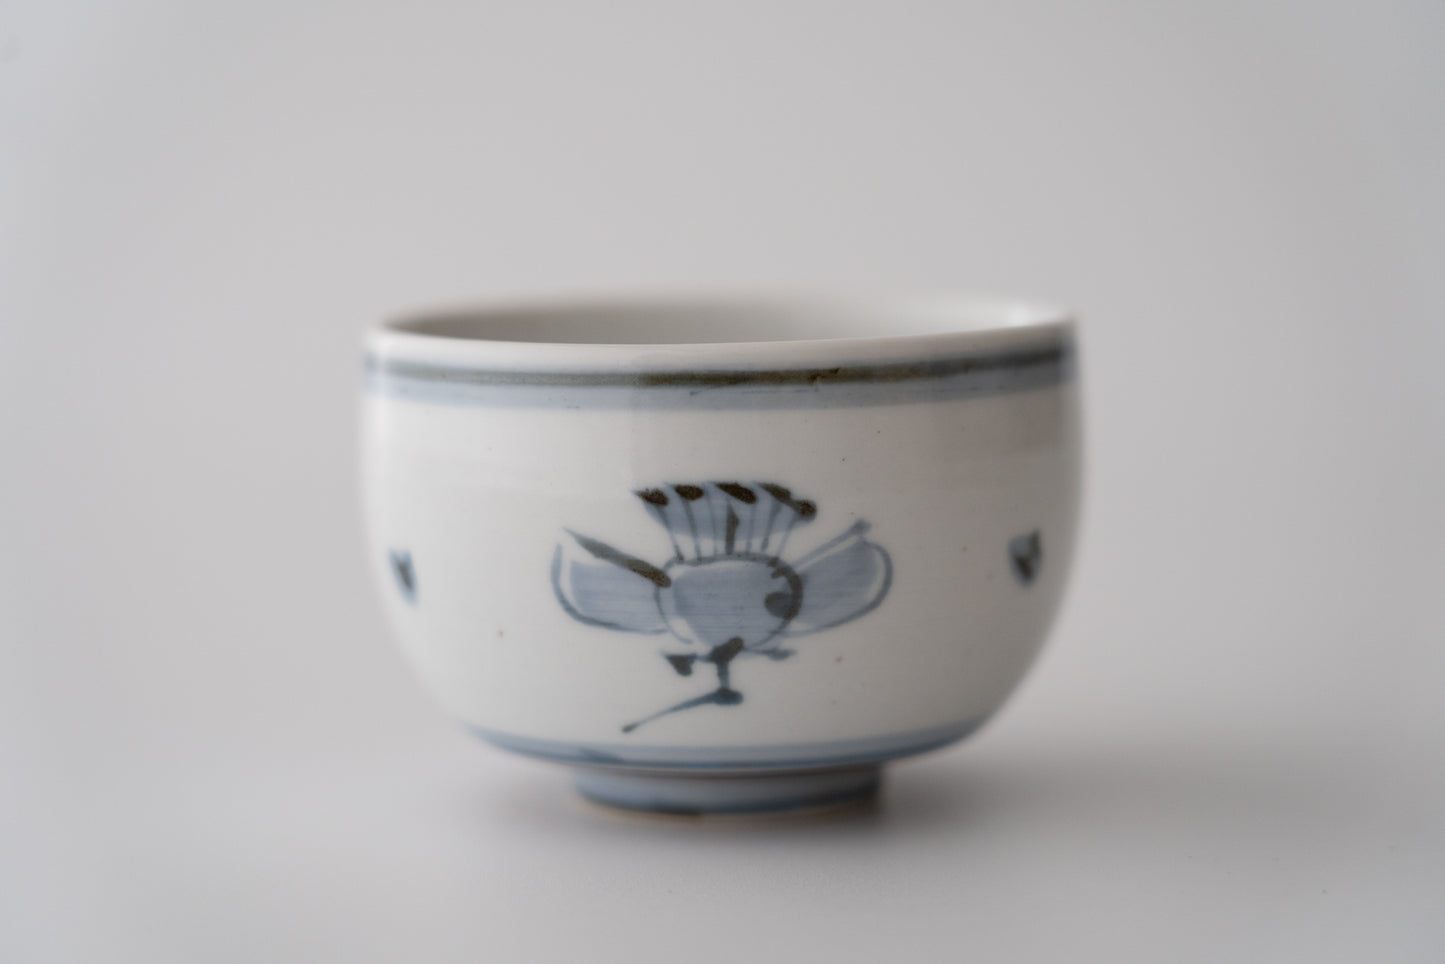 Kenkichi Tomimoto, A set of five sencha tea cup with plum design and iron painting